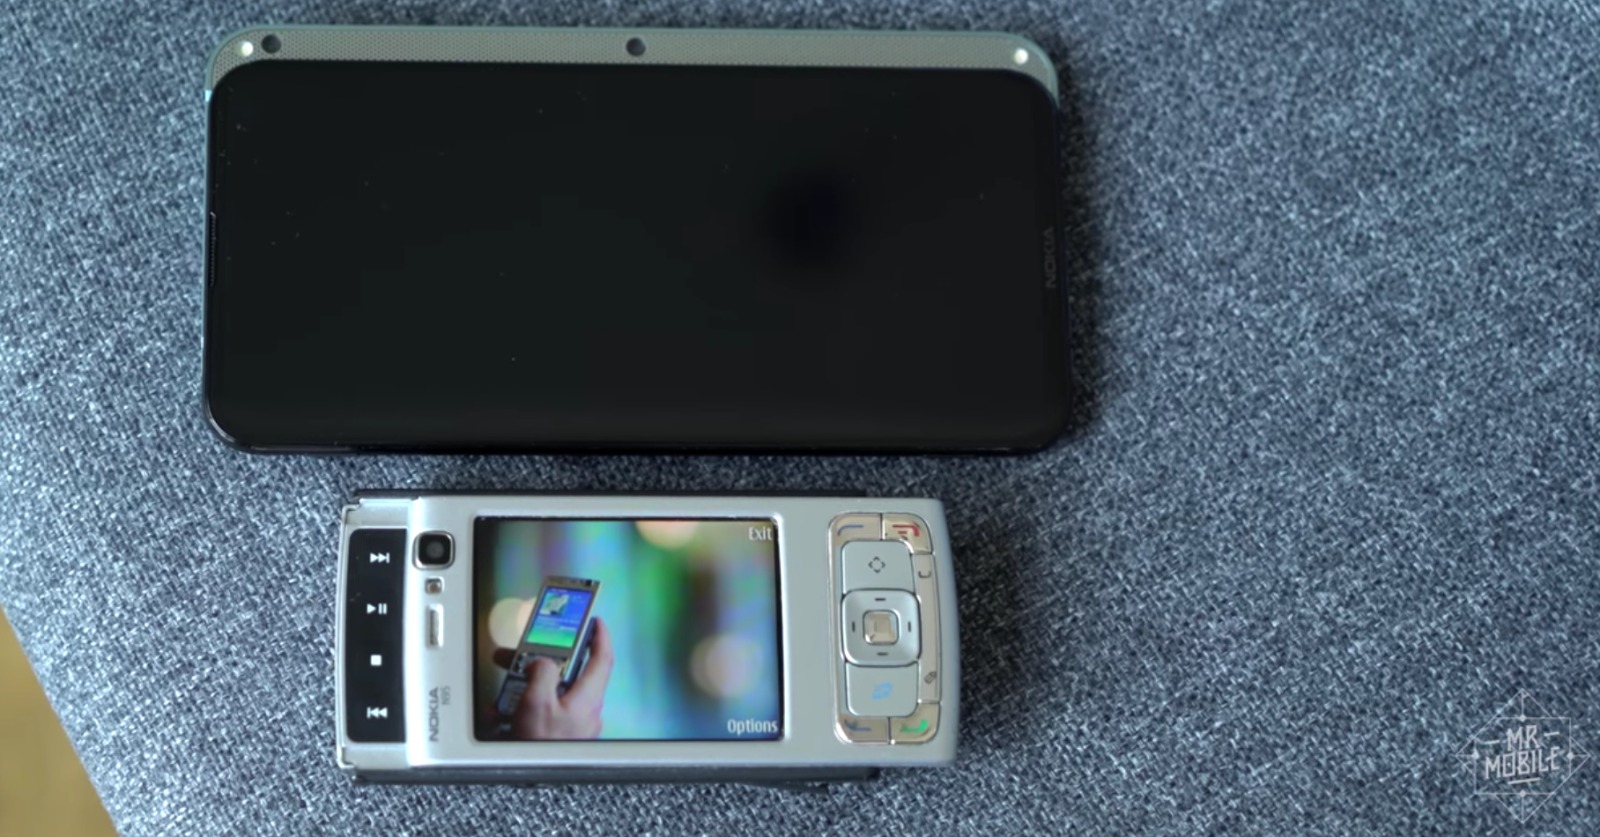 afslappet frivillig Repaste Latest Mr. Mobile video reveals the prototype of a modern Nokia N95 remake  | Nokiamob